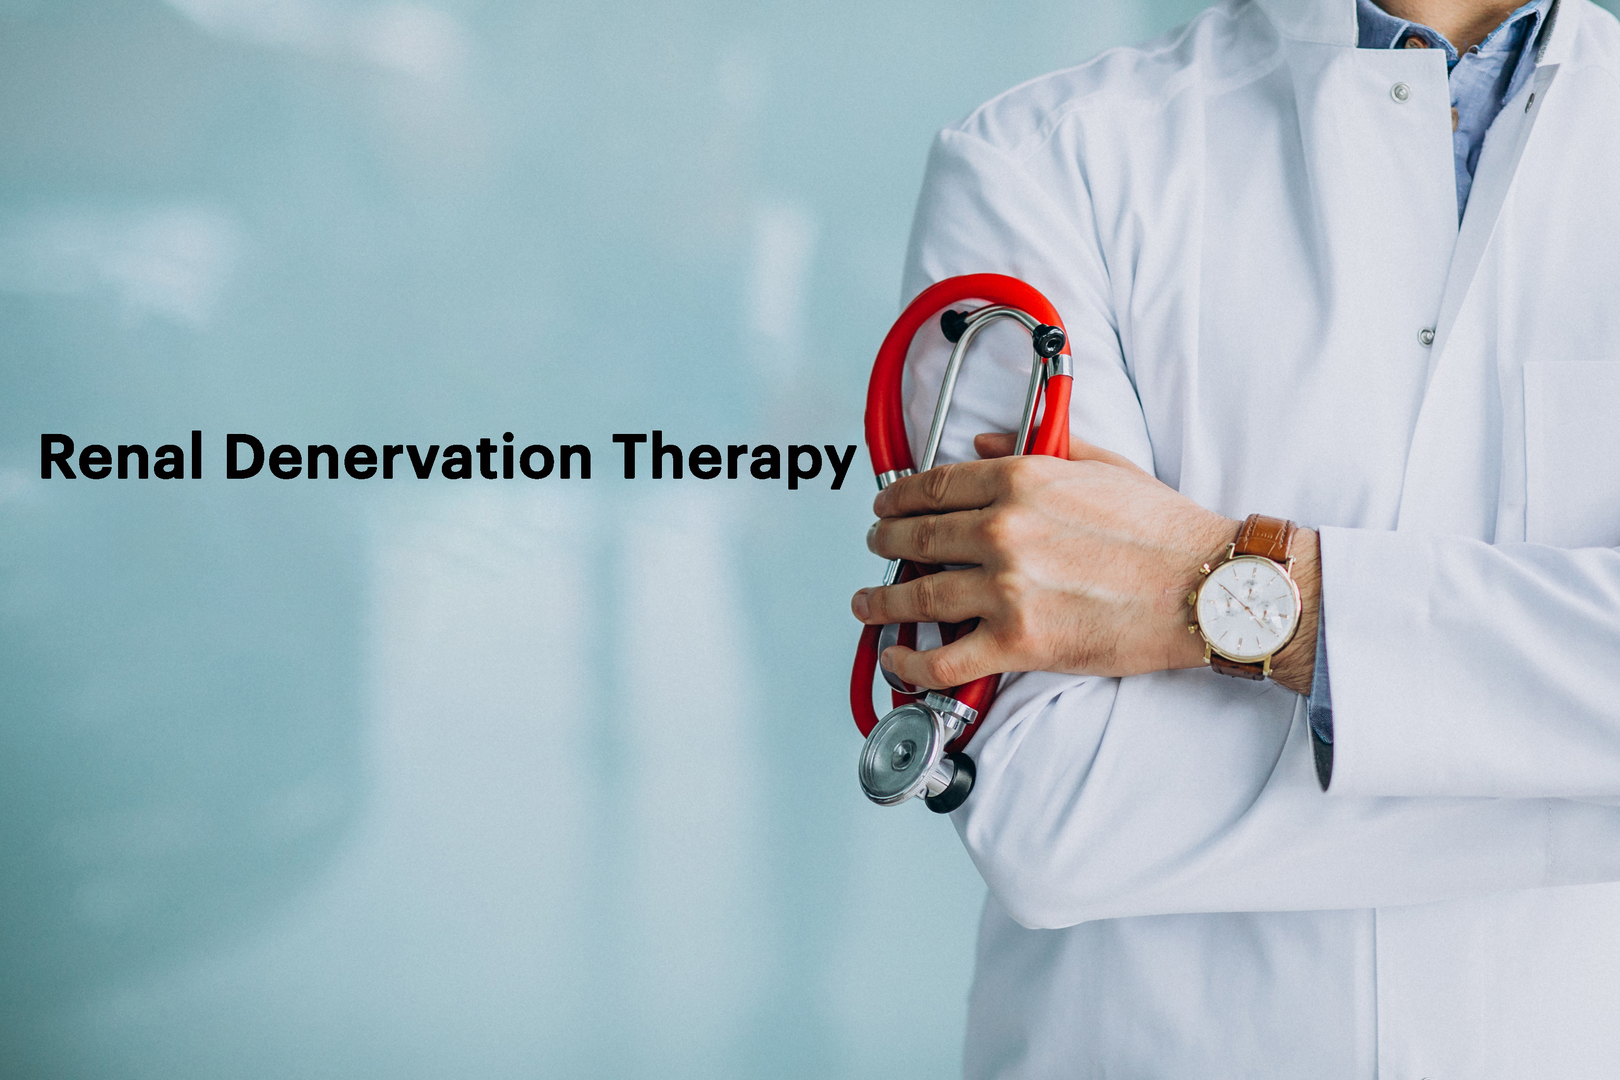 Renal Denervation Therapy   in the Management of   Hypertension on a 72-Year-Old Patient